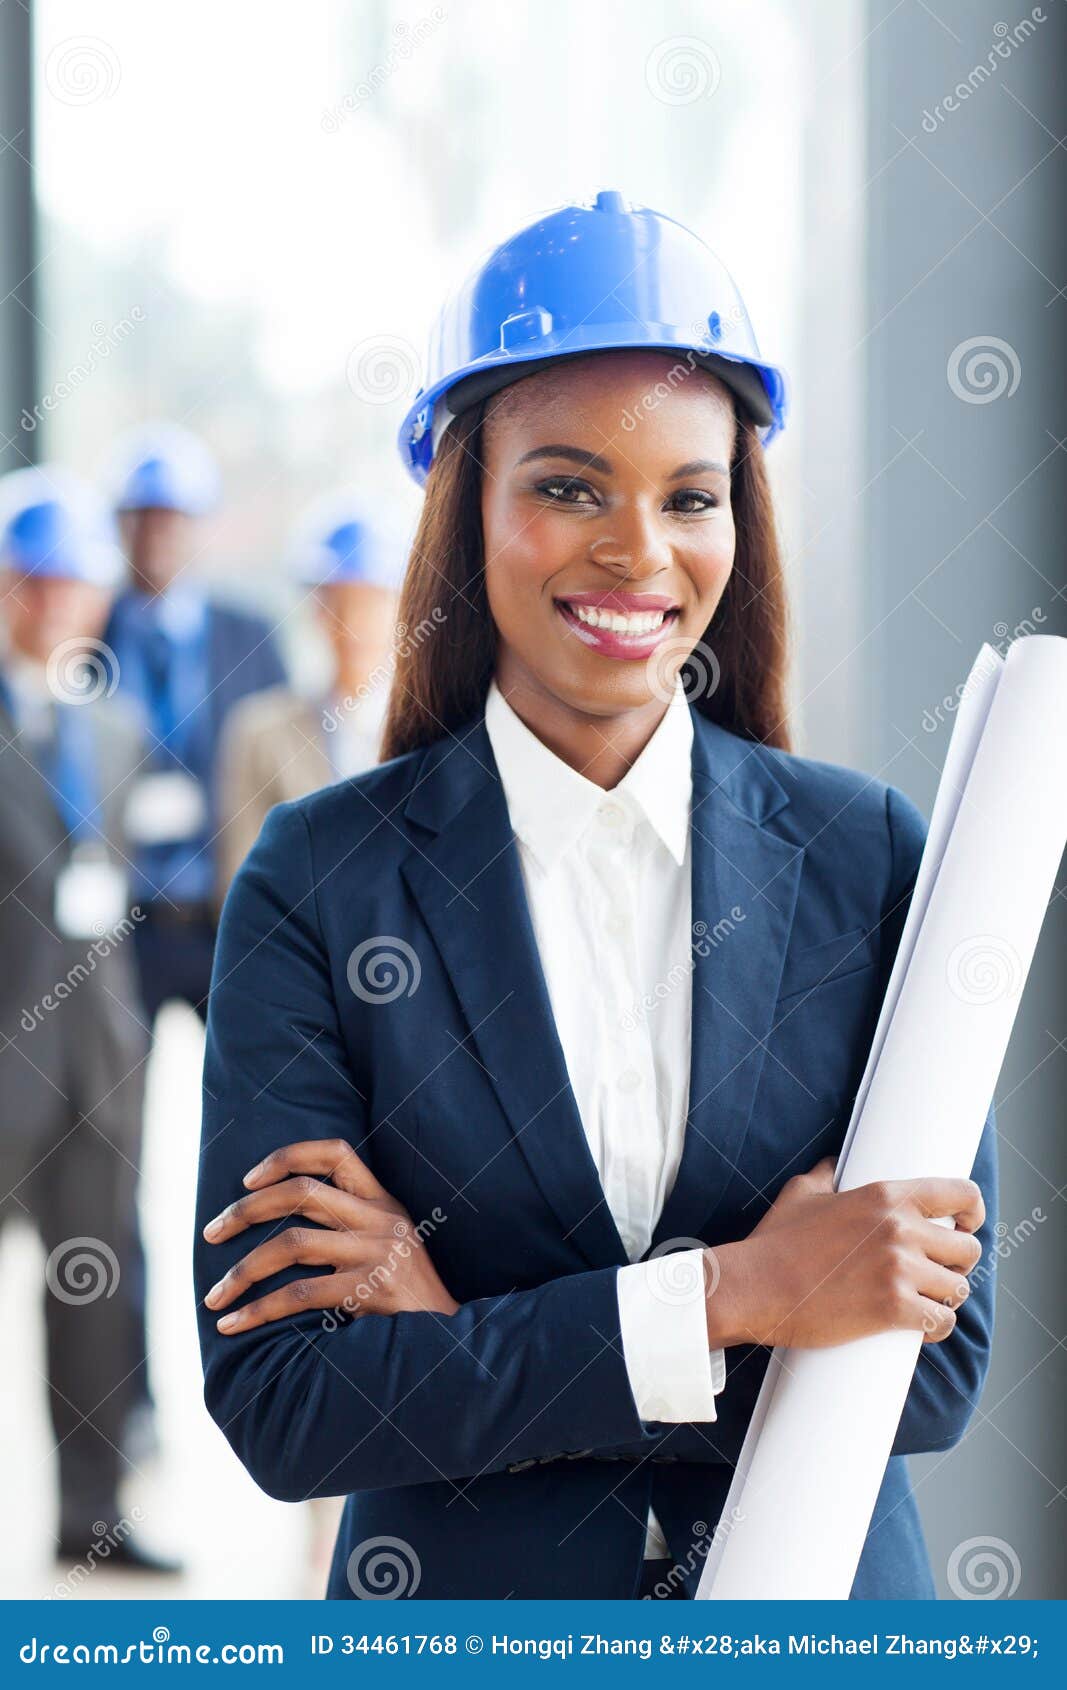 Construction manager job in africa